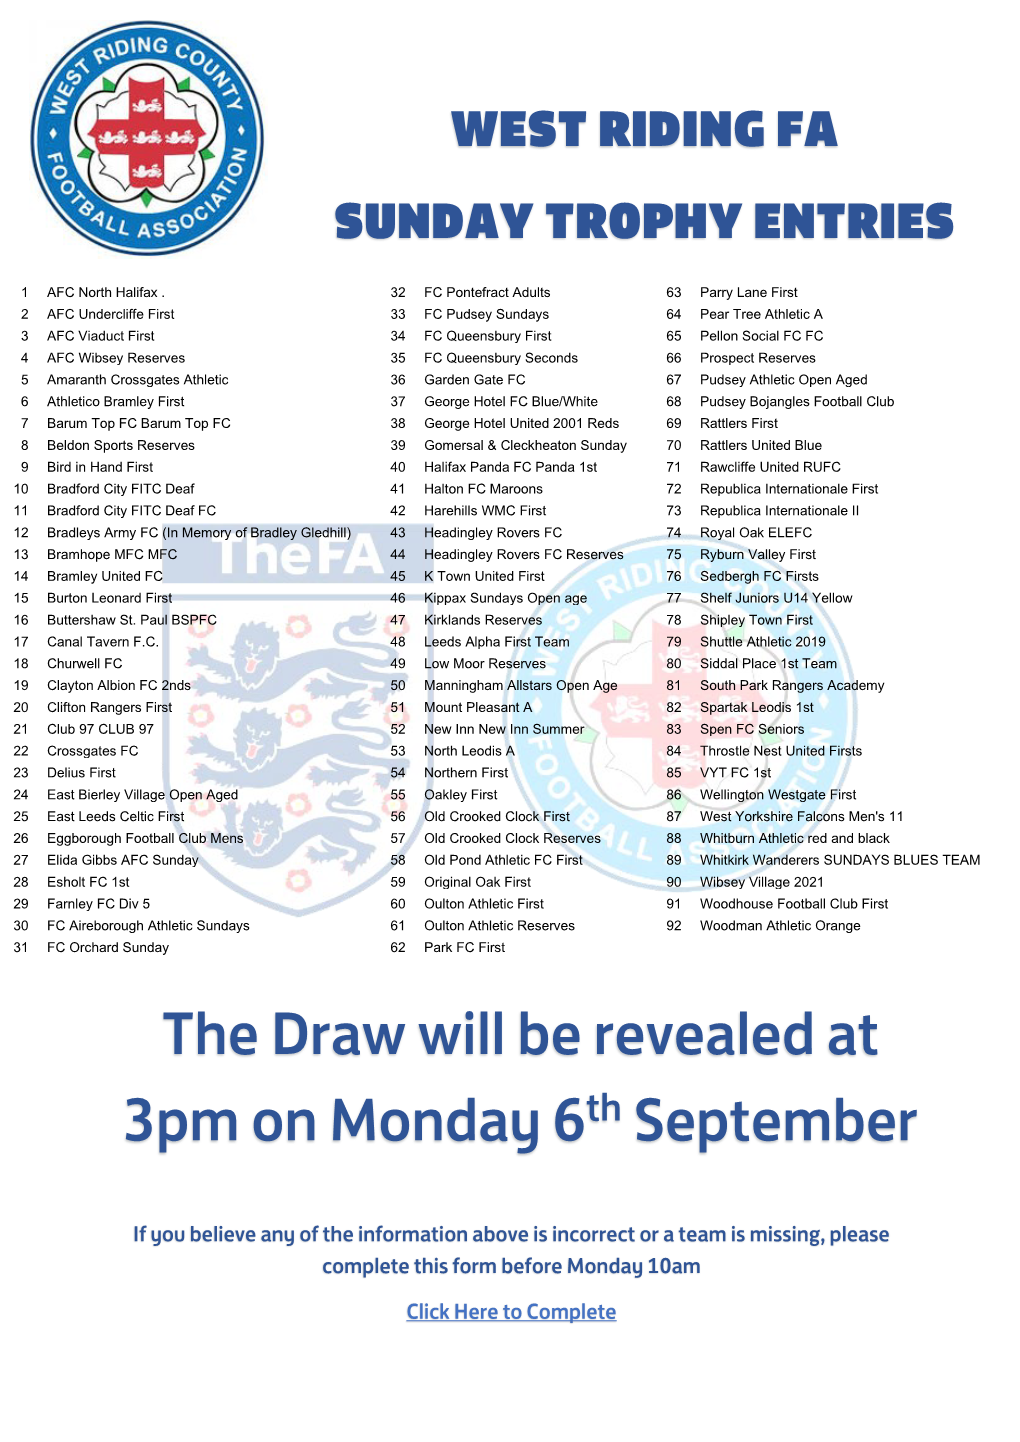 The Draw Will Be Revealed at 3Pm on Monday 6Th September